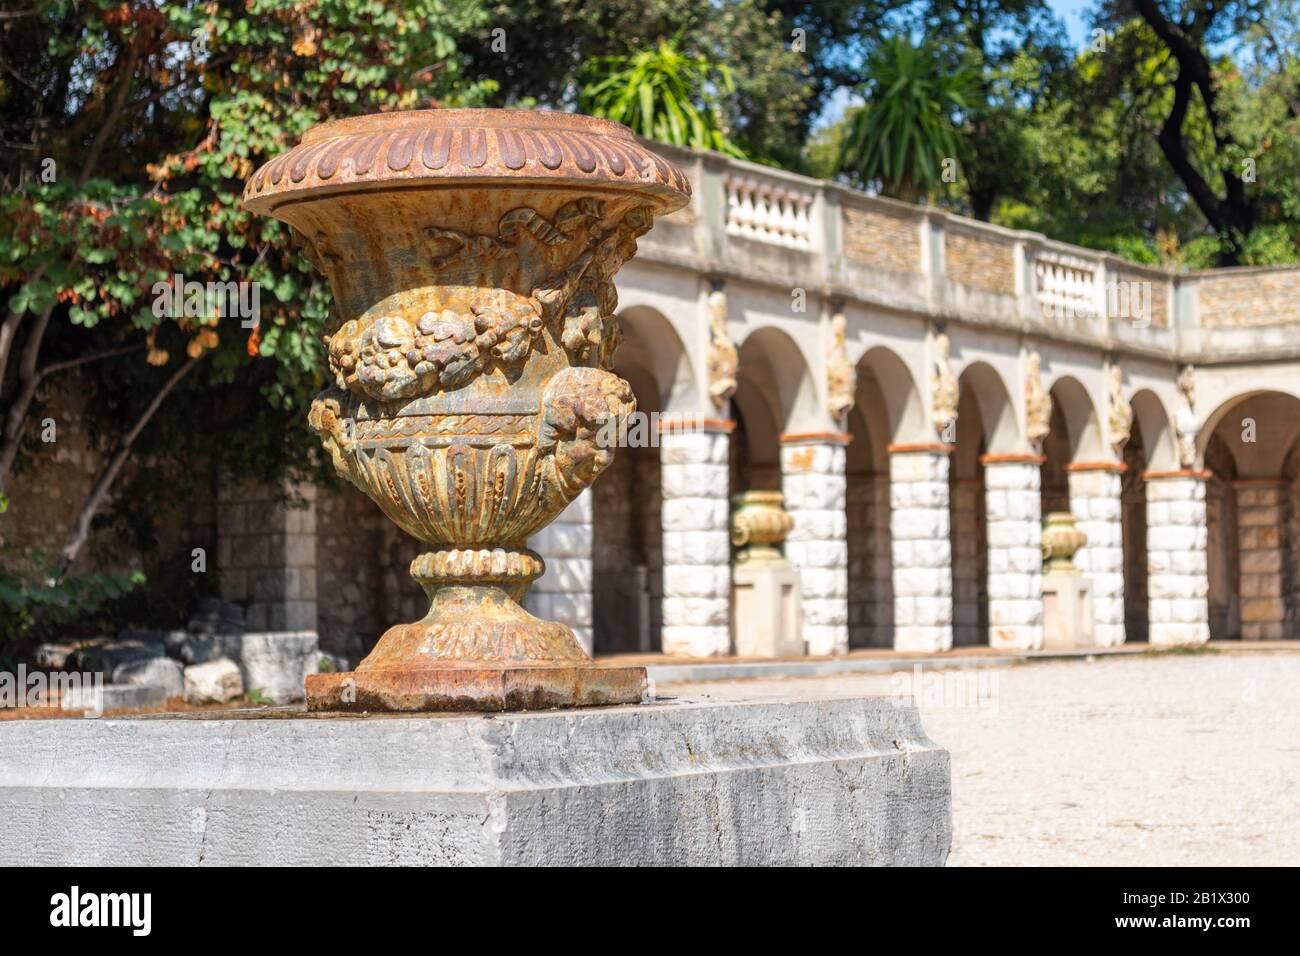 An ornate antique vase sits atop a column with a historic arched building blurred behind on Castle Hill in Nice, France. Stock Photo